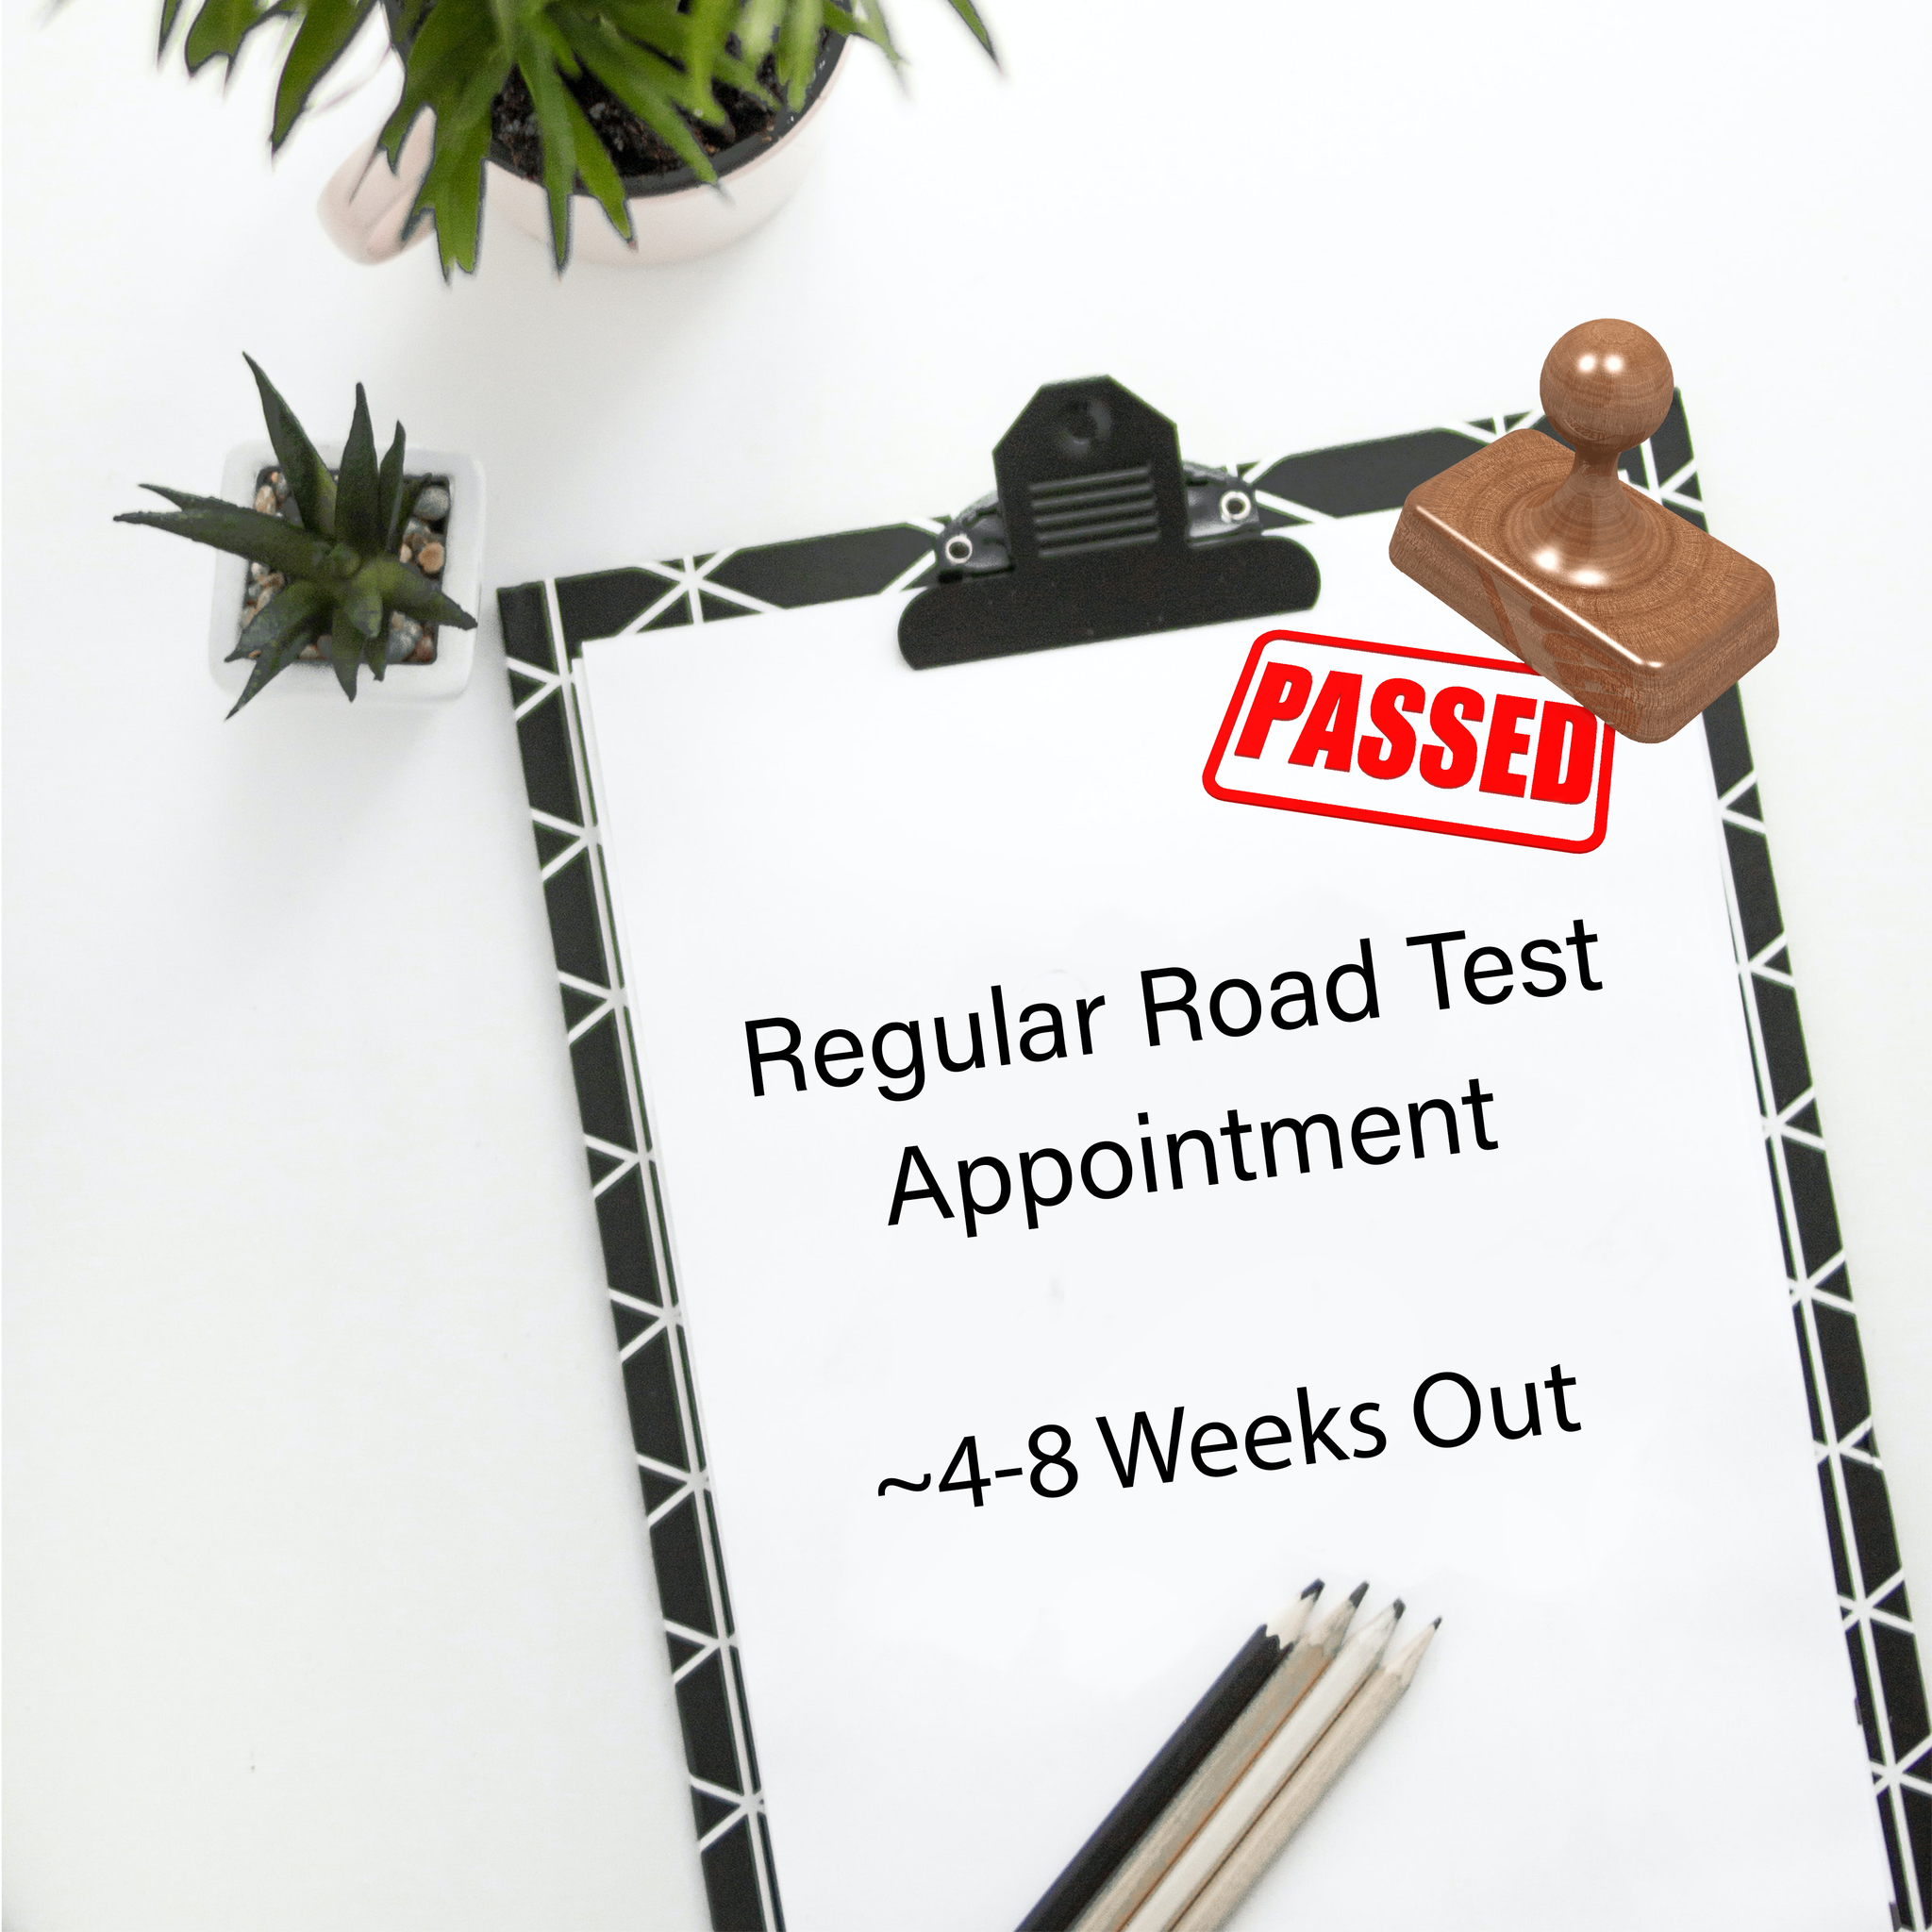 Regular Road Test Appointment